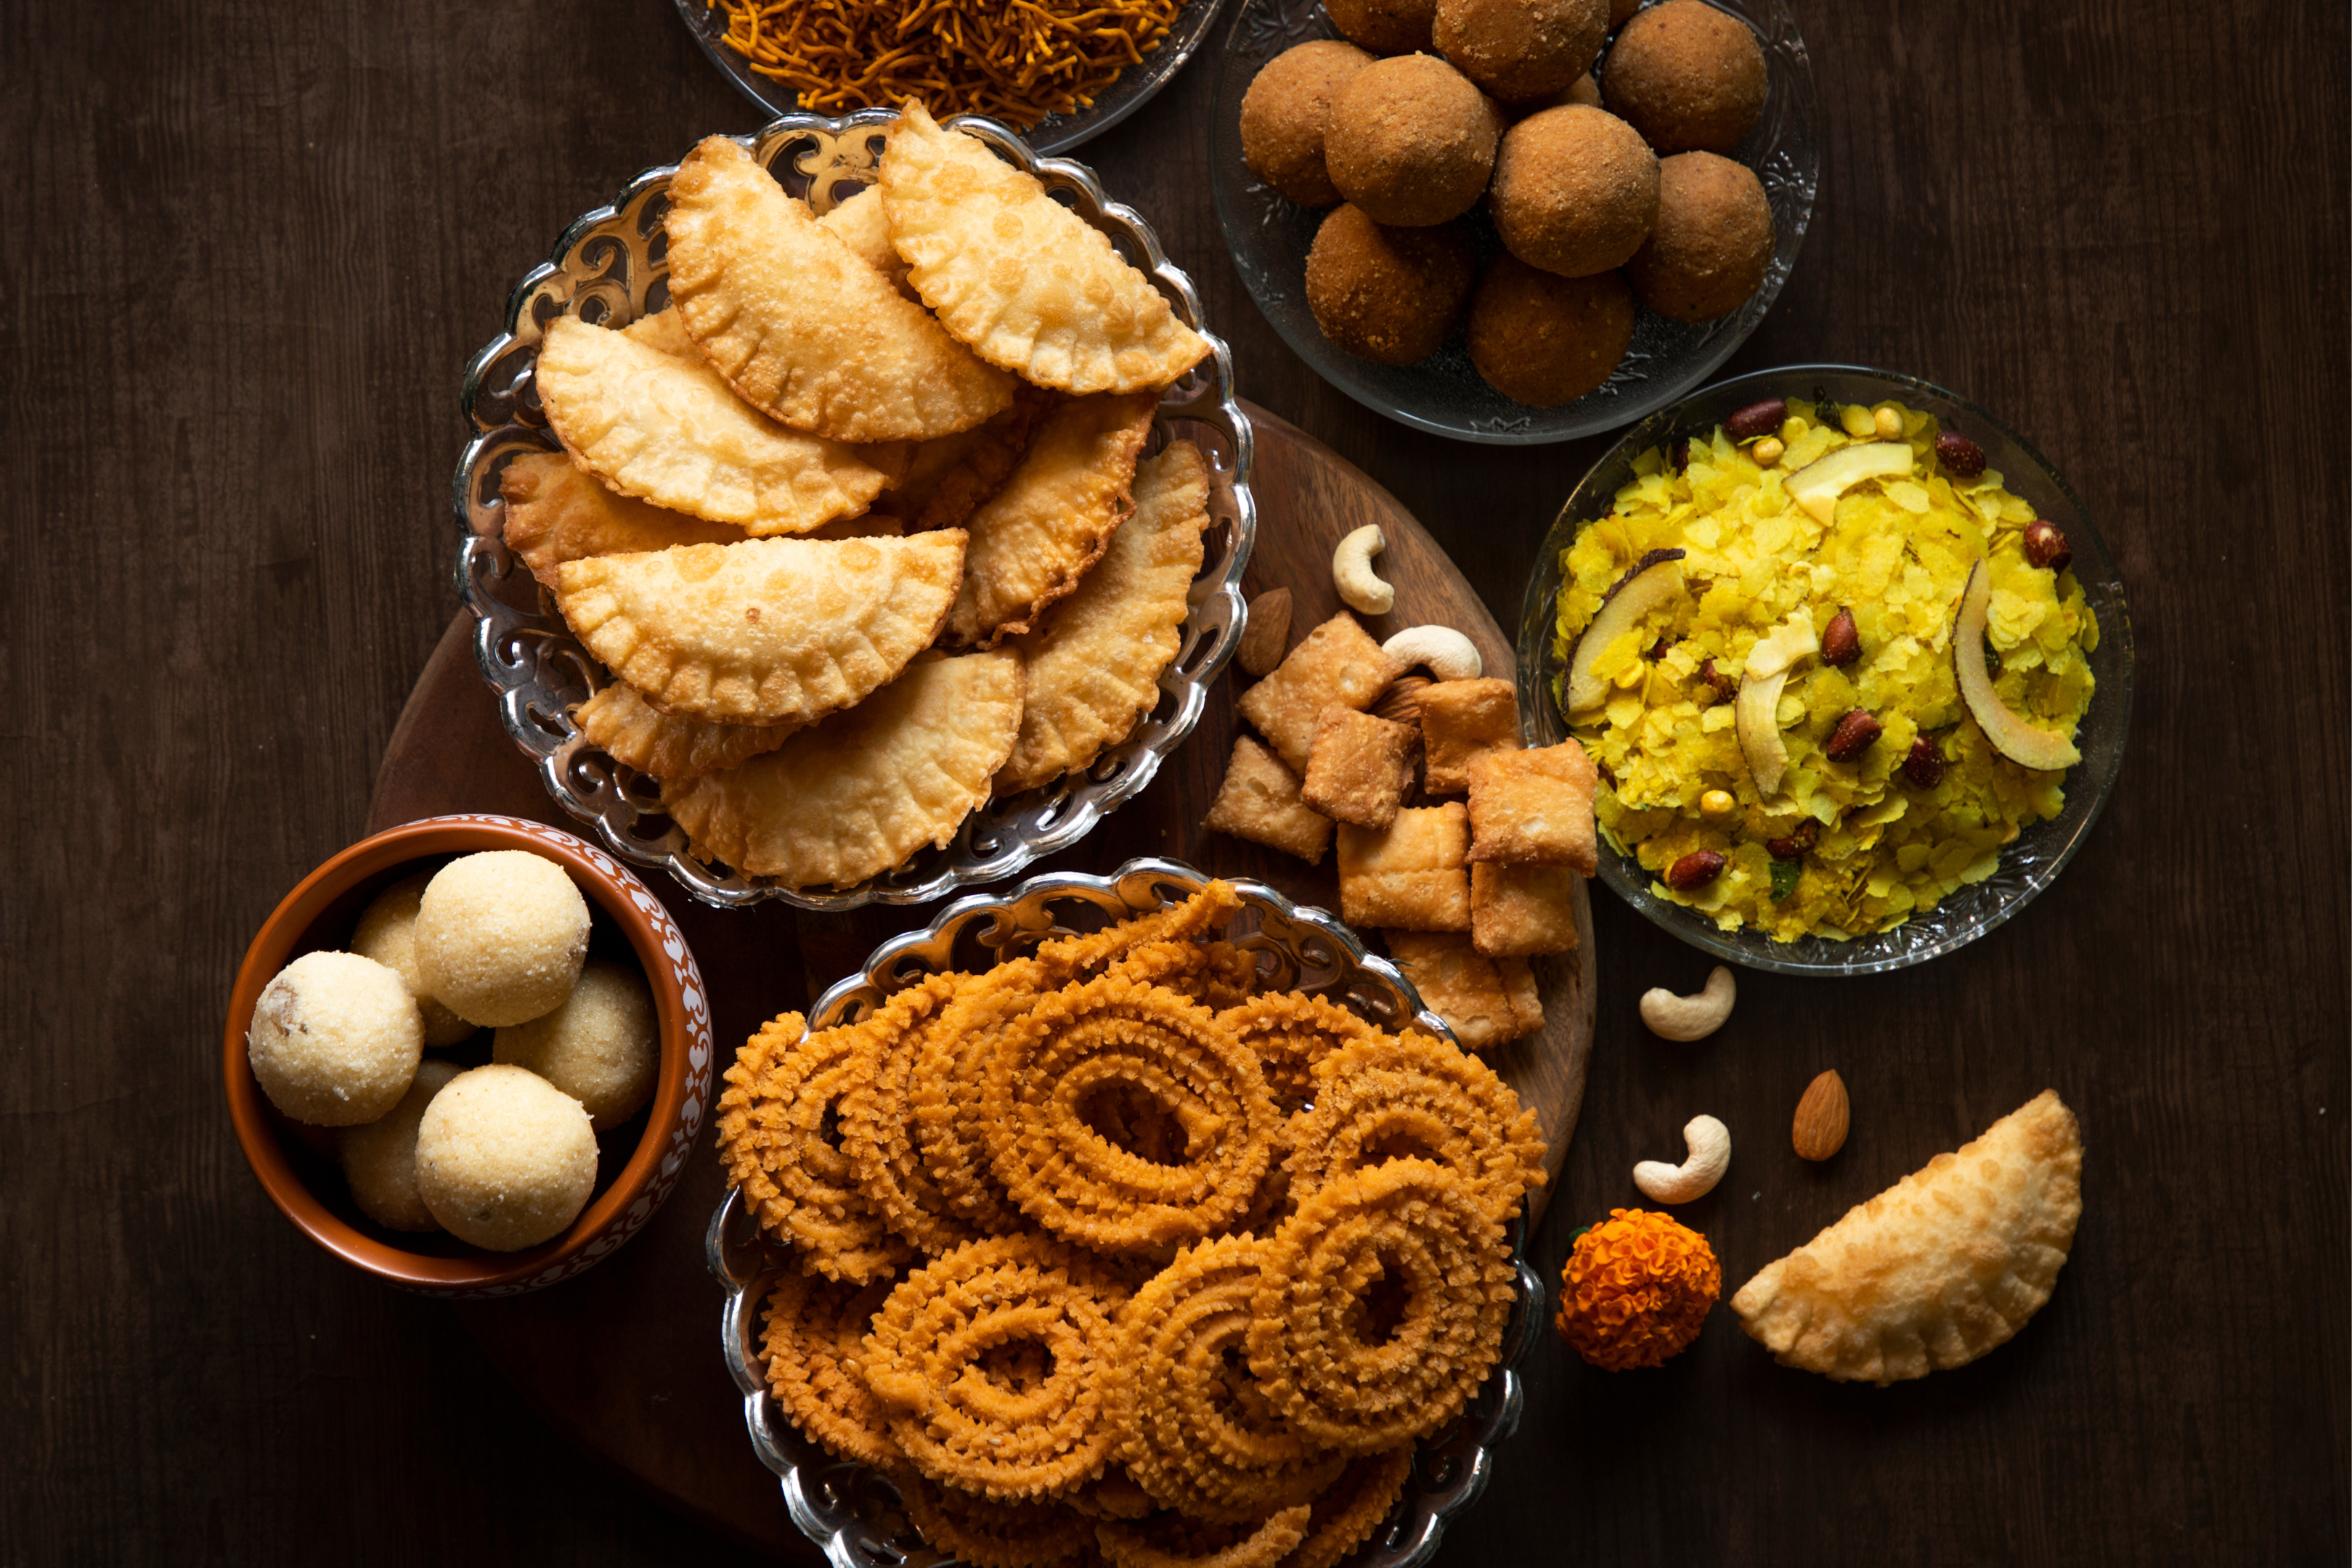 A spread of foods from a Diwali celebration